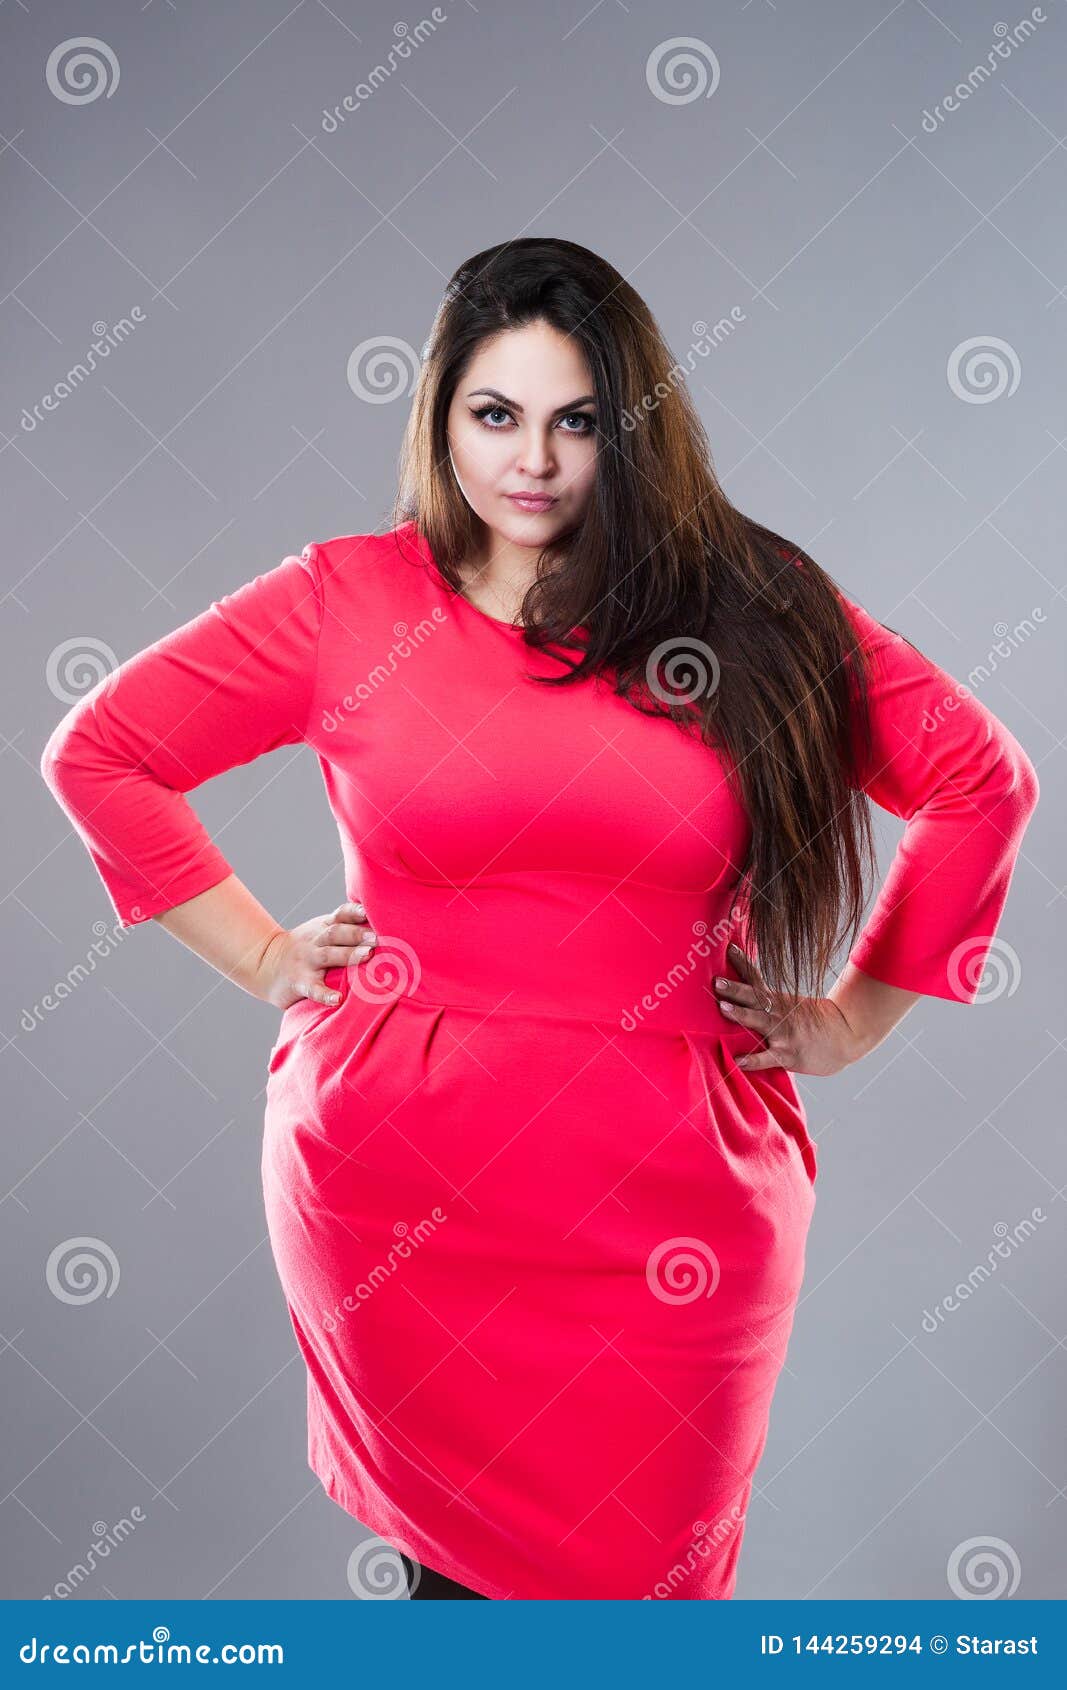 Plus Size Fashion Model in Red Dress, Fat Woman on Gray Background ...